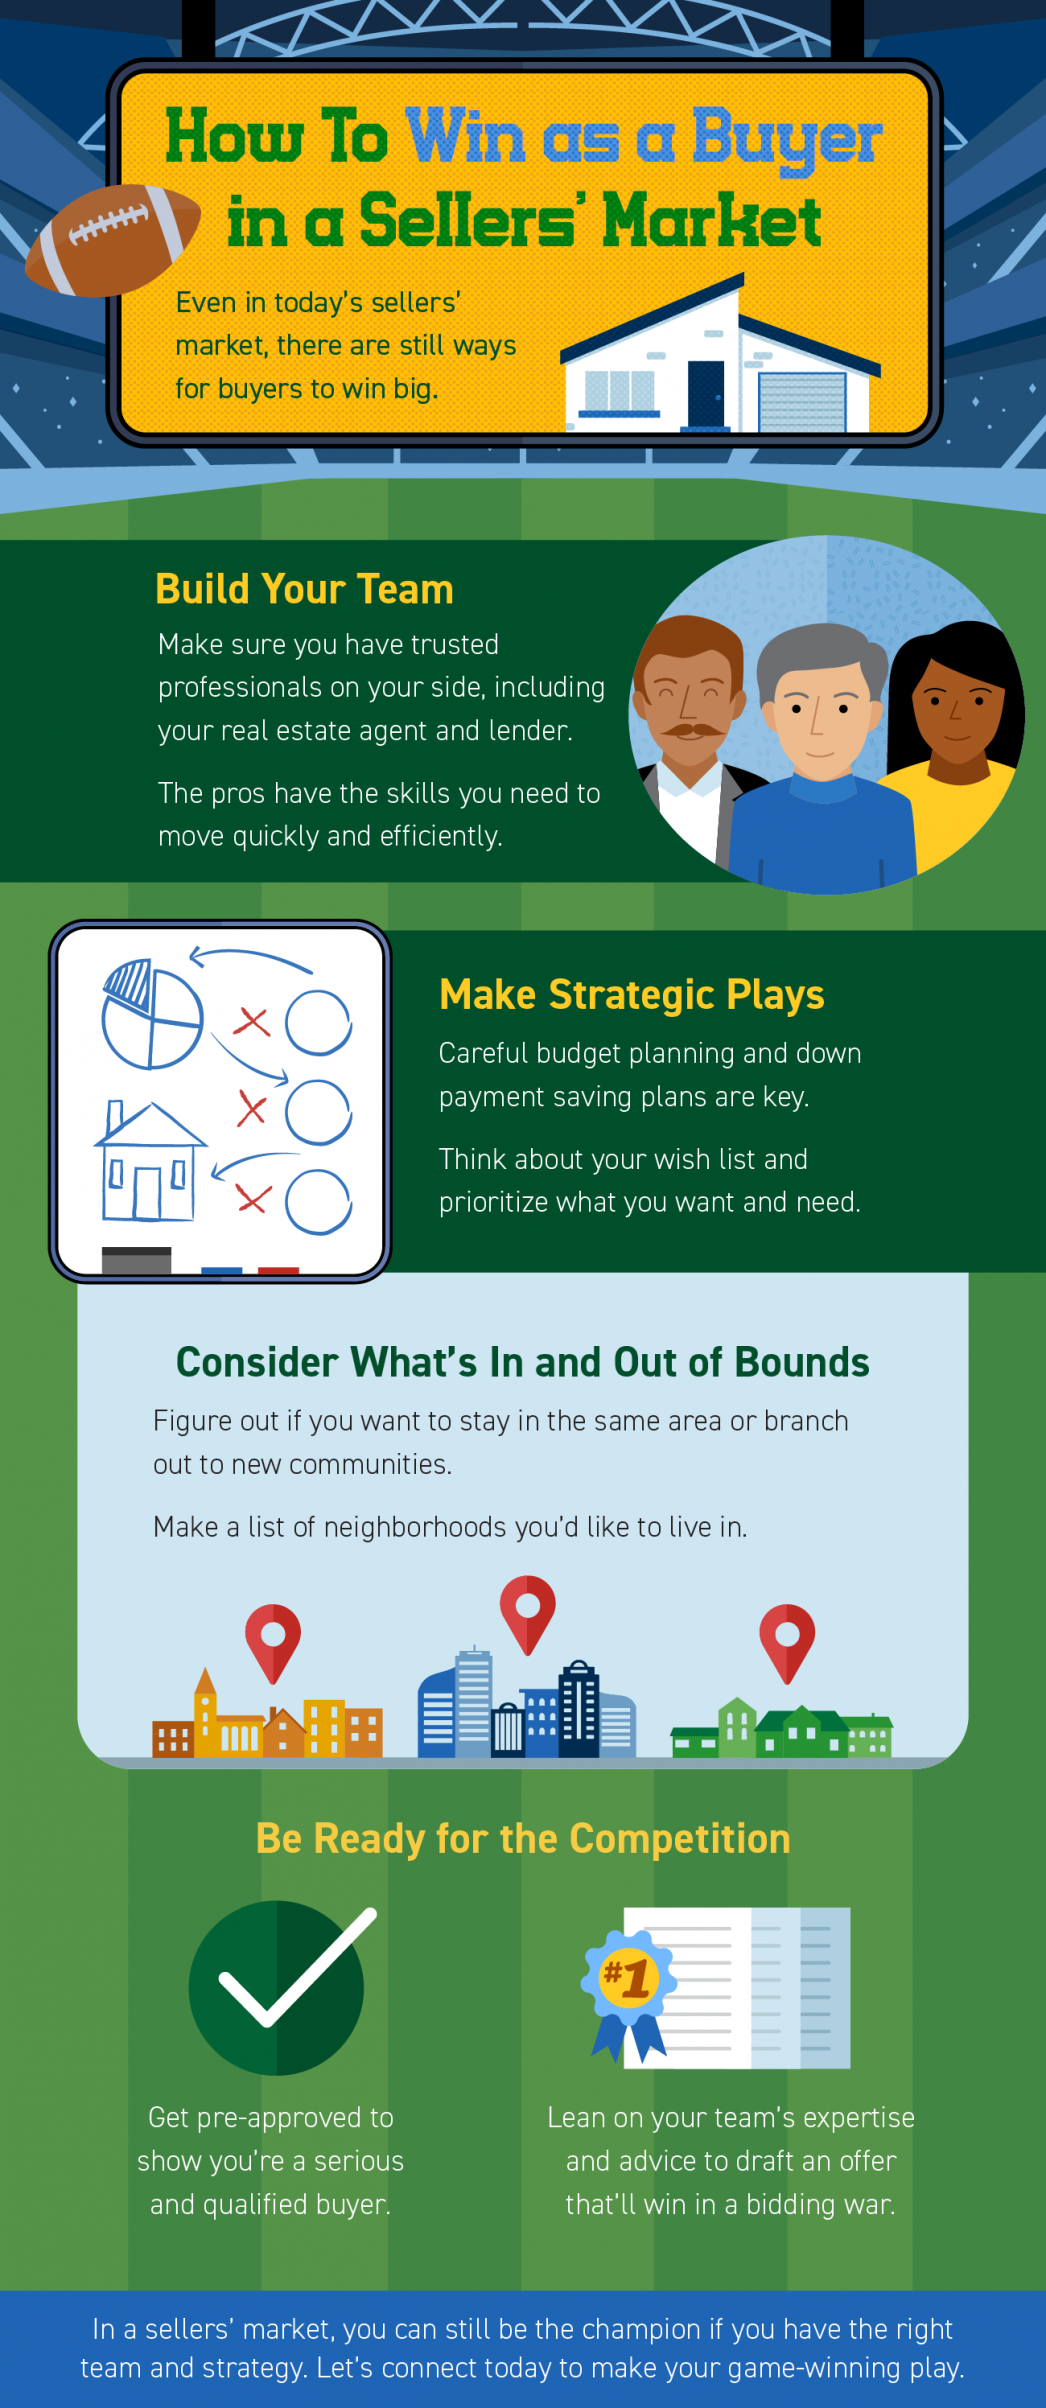 How To Win as a Buyer in a Sellers’ Market [INFOGRAPHIC] | MyKCM